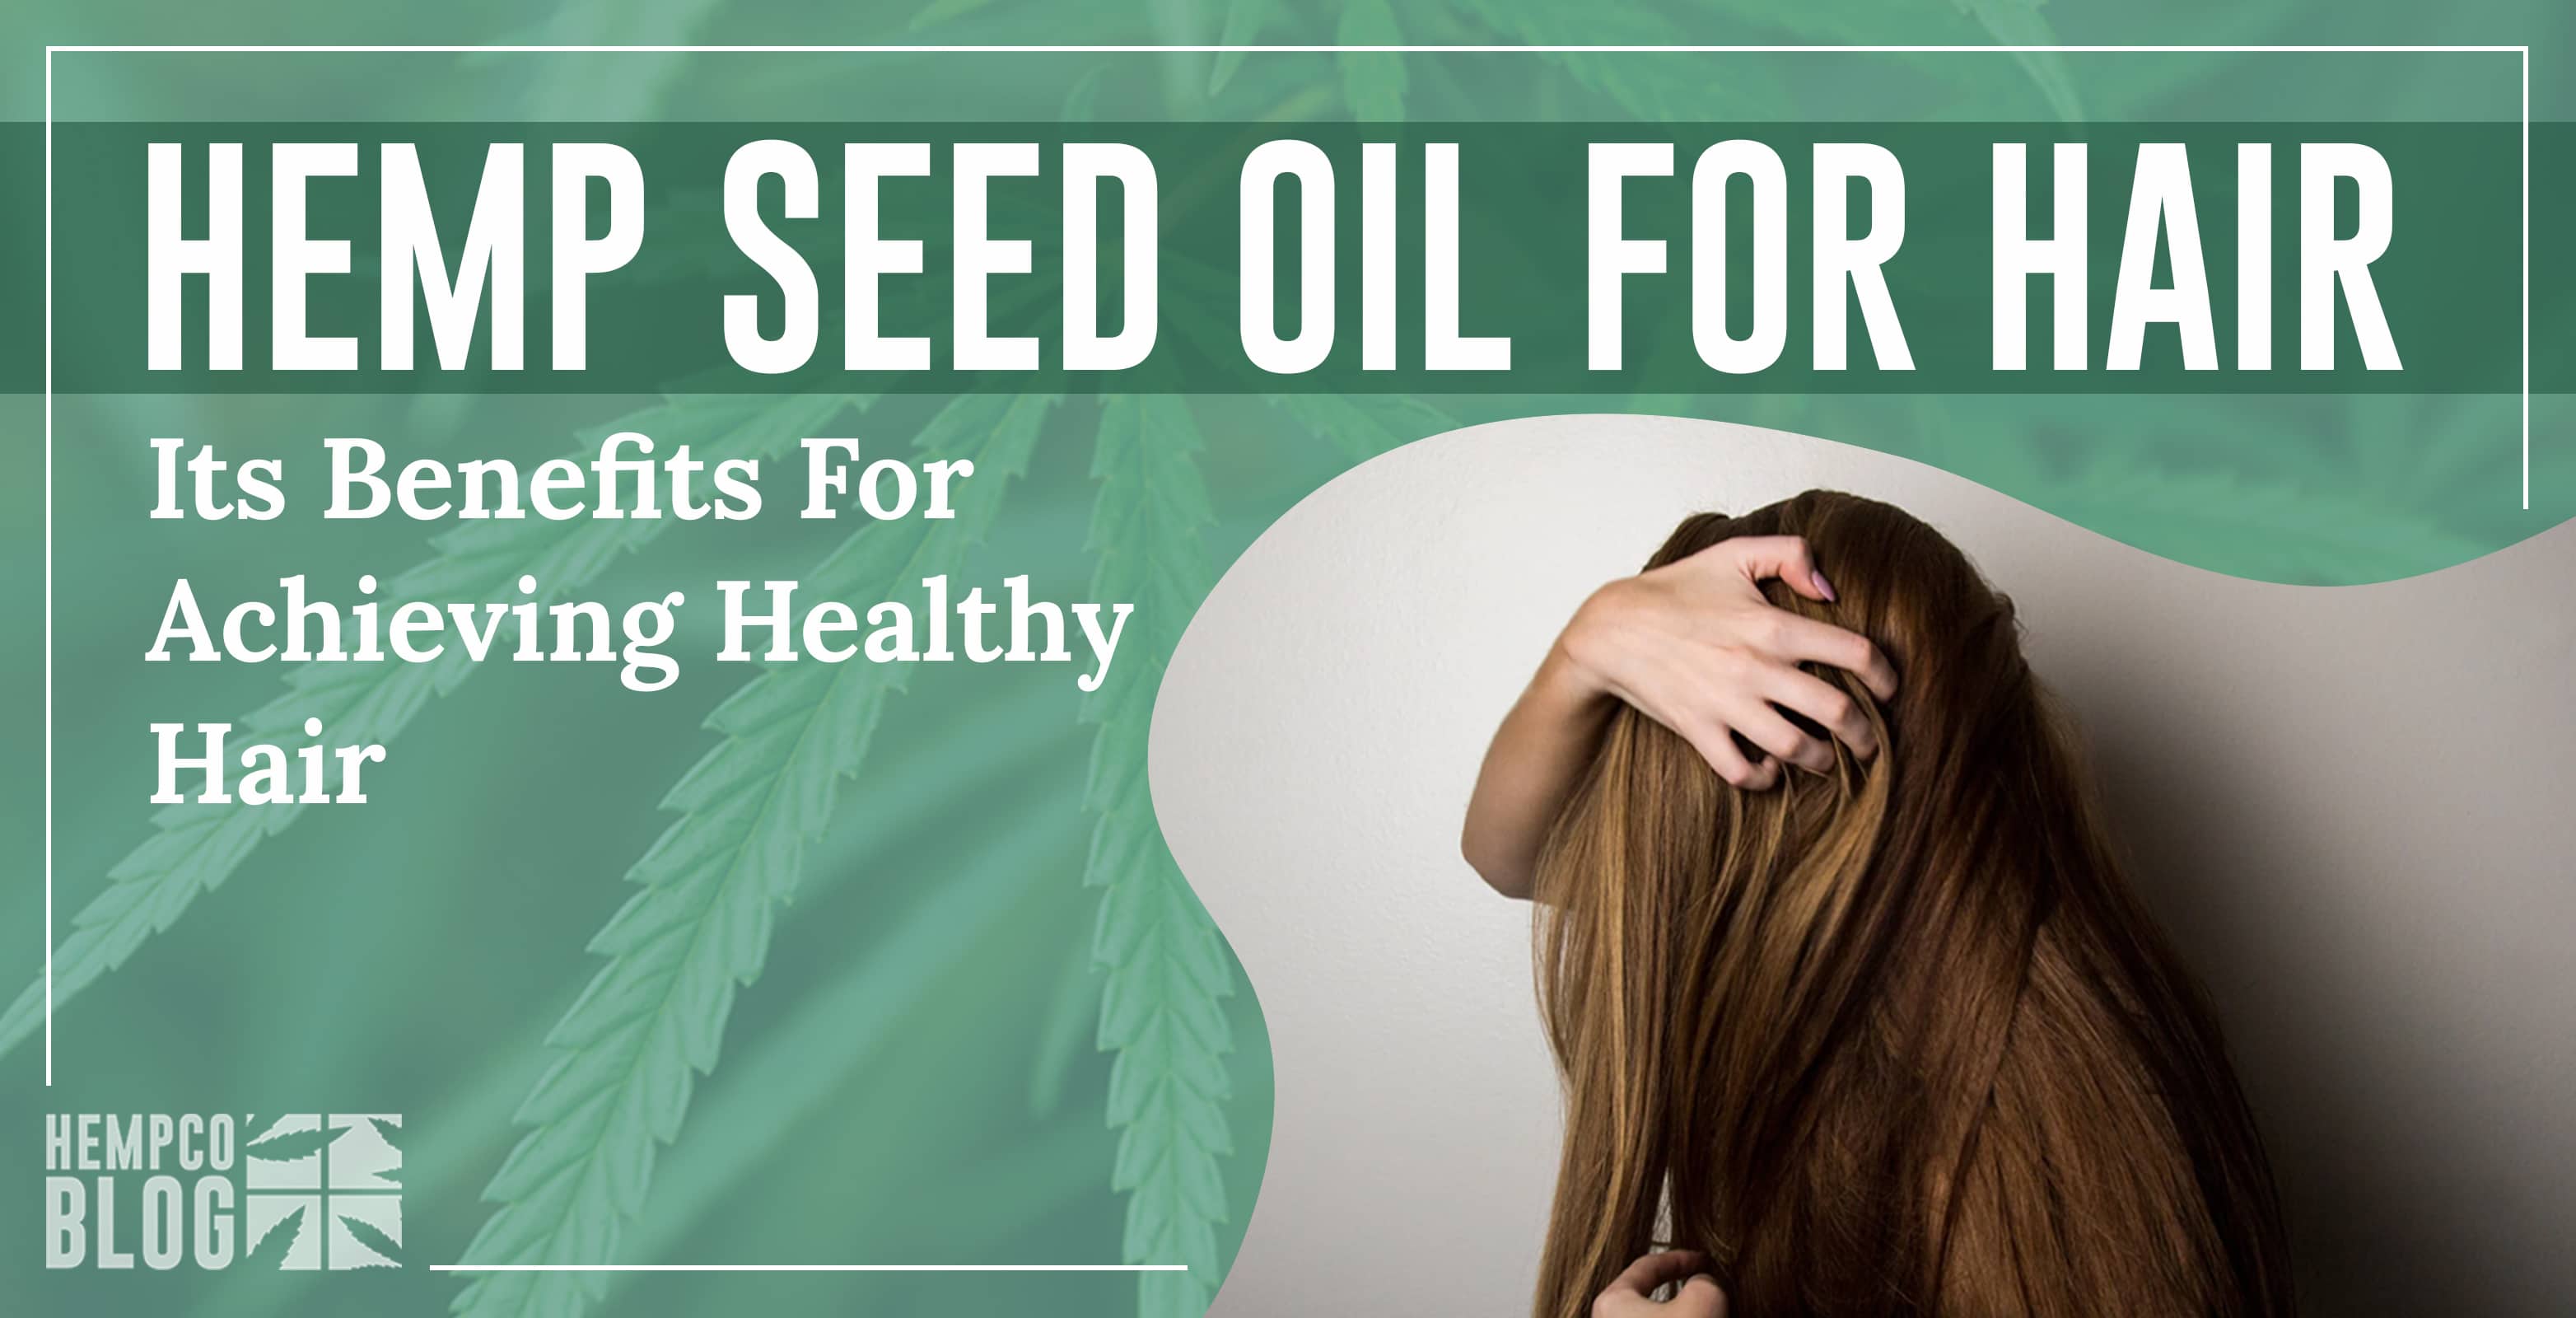 hemp seed oil for hair and benefits for healthy hair